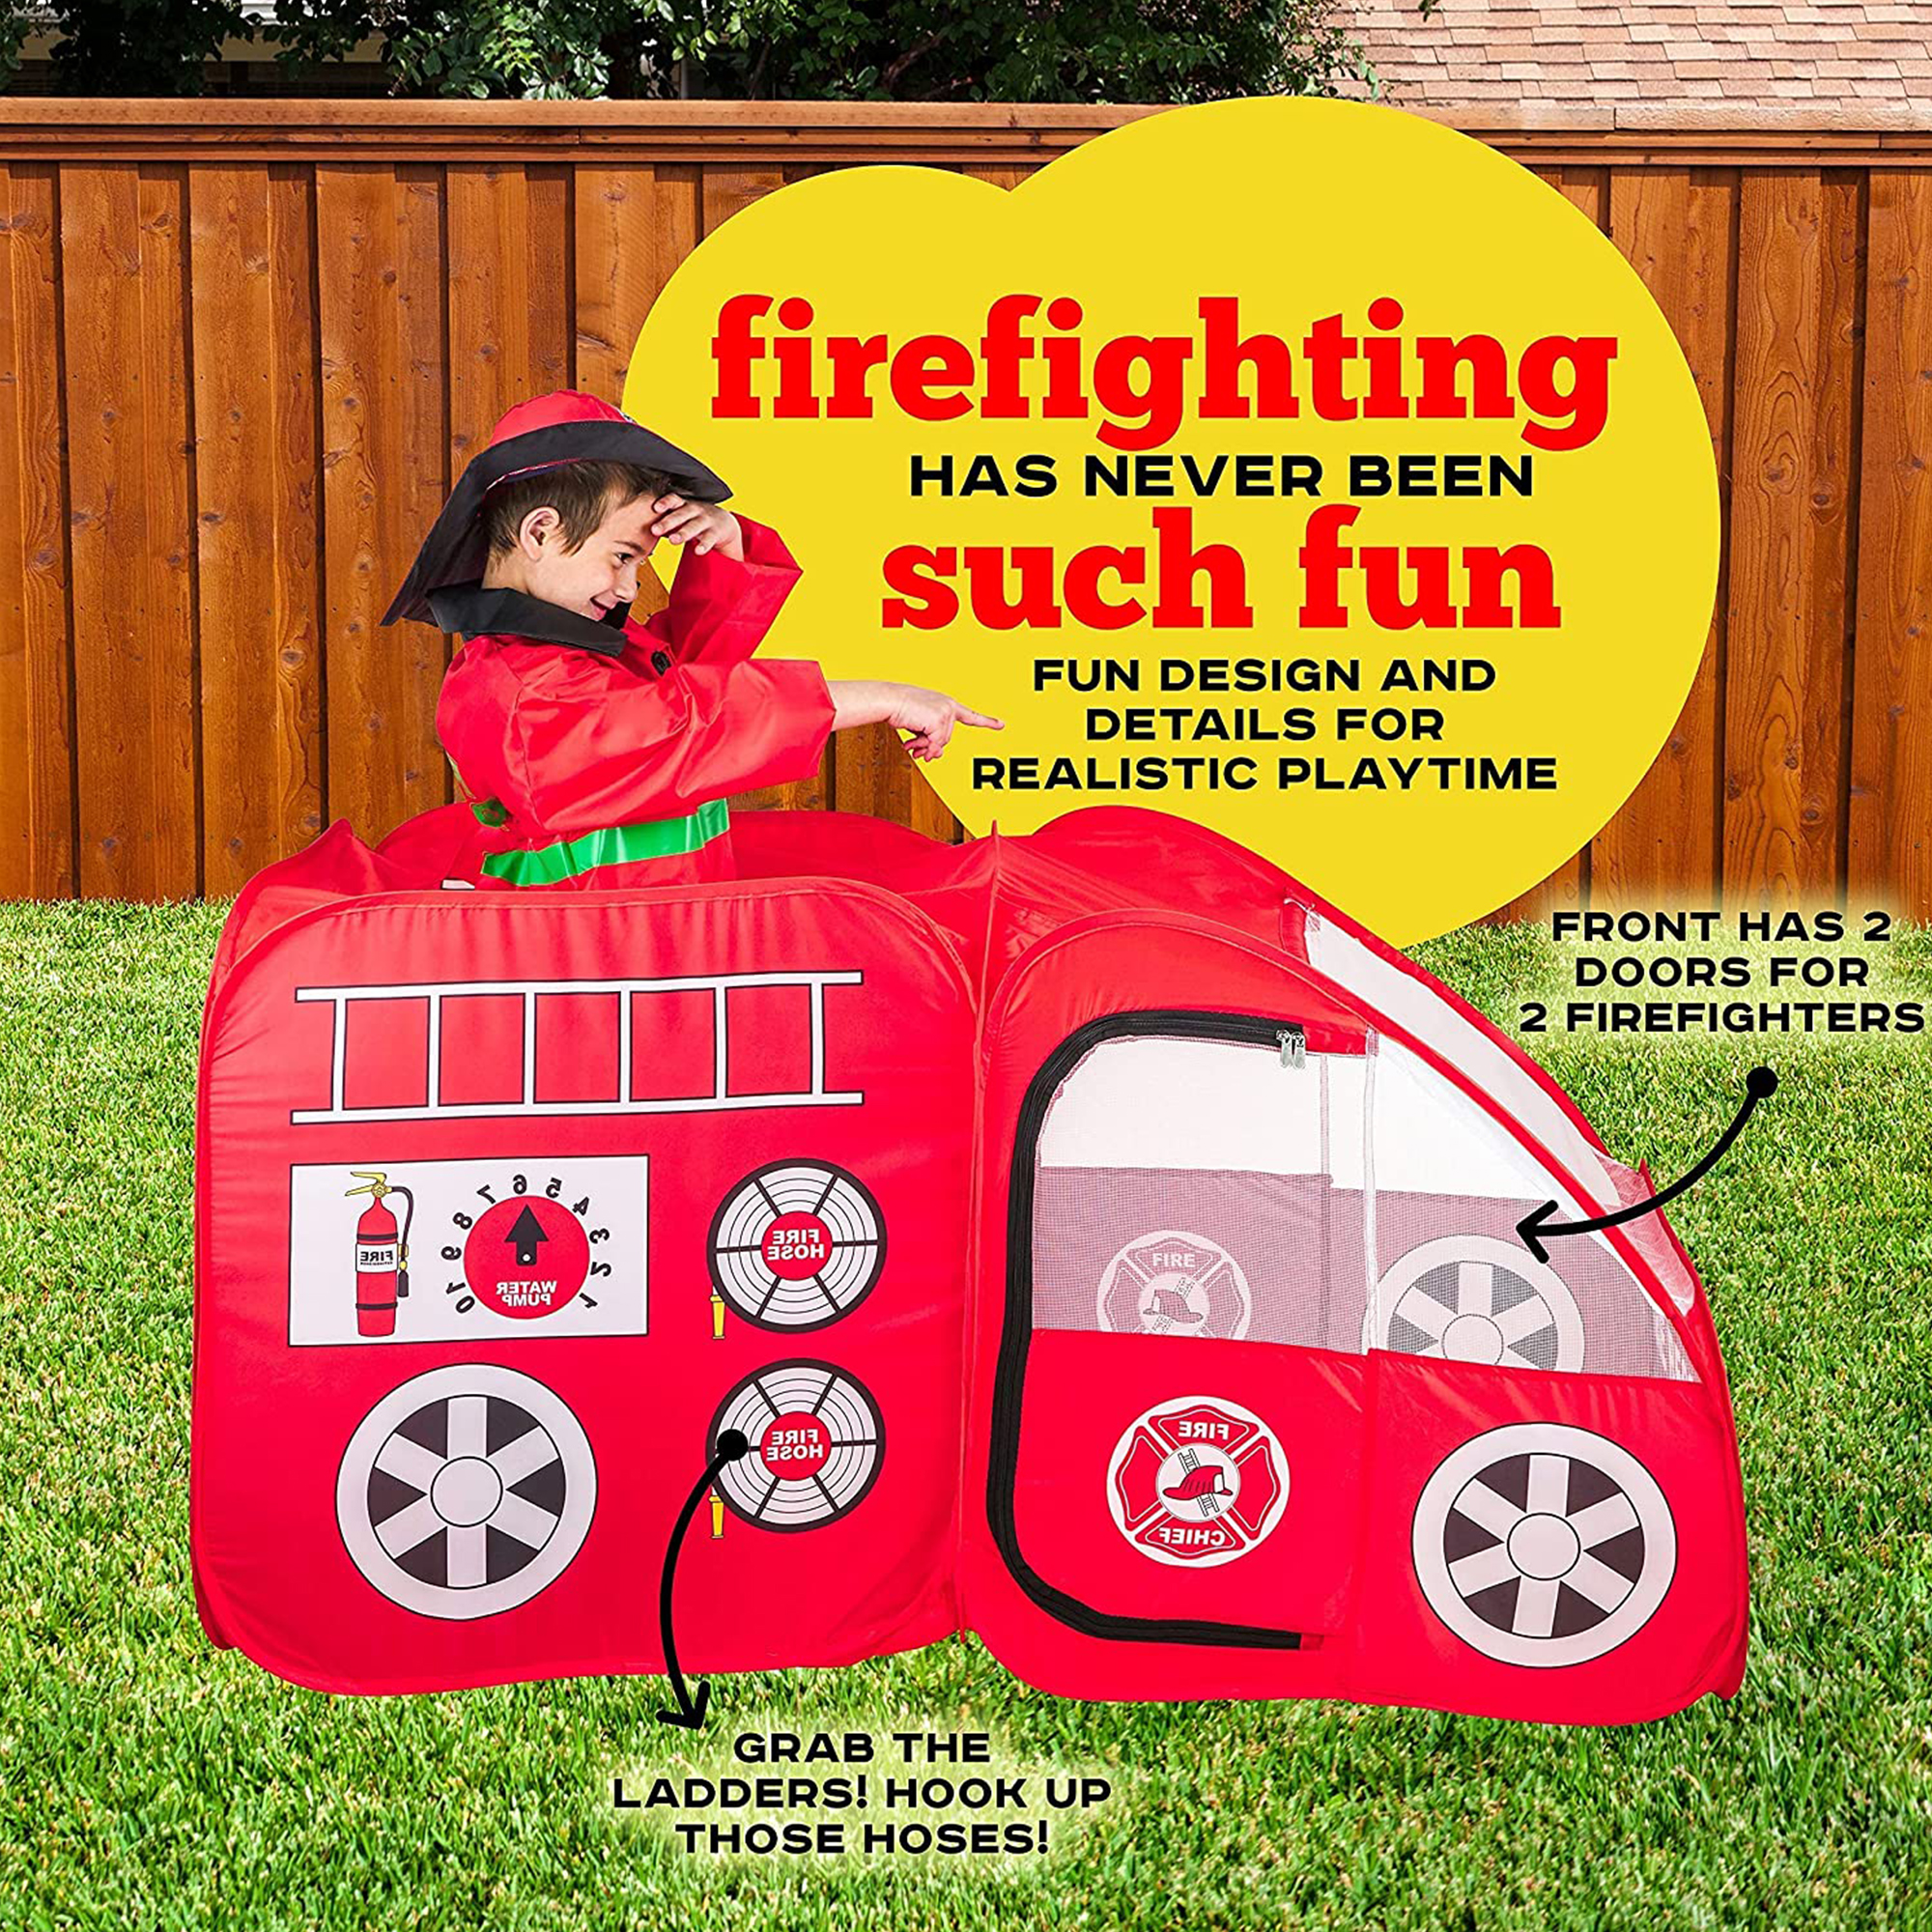 Kiddzery Pretend Playhouse Fire Truck Pop Up Play Tent for Kids with Siren Sound, Red - image 5 of 9